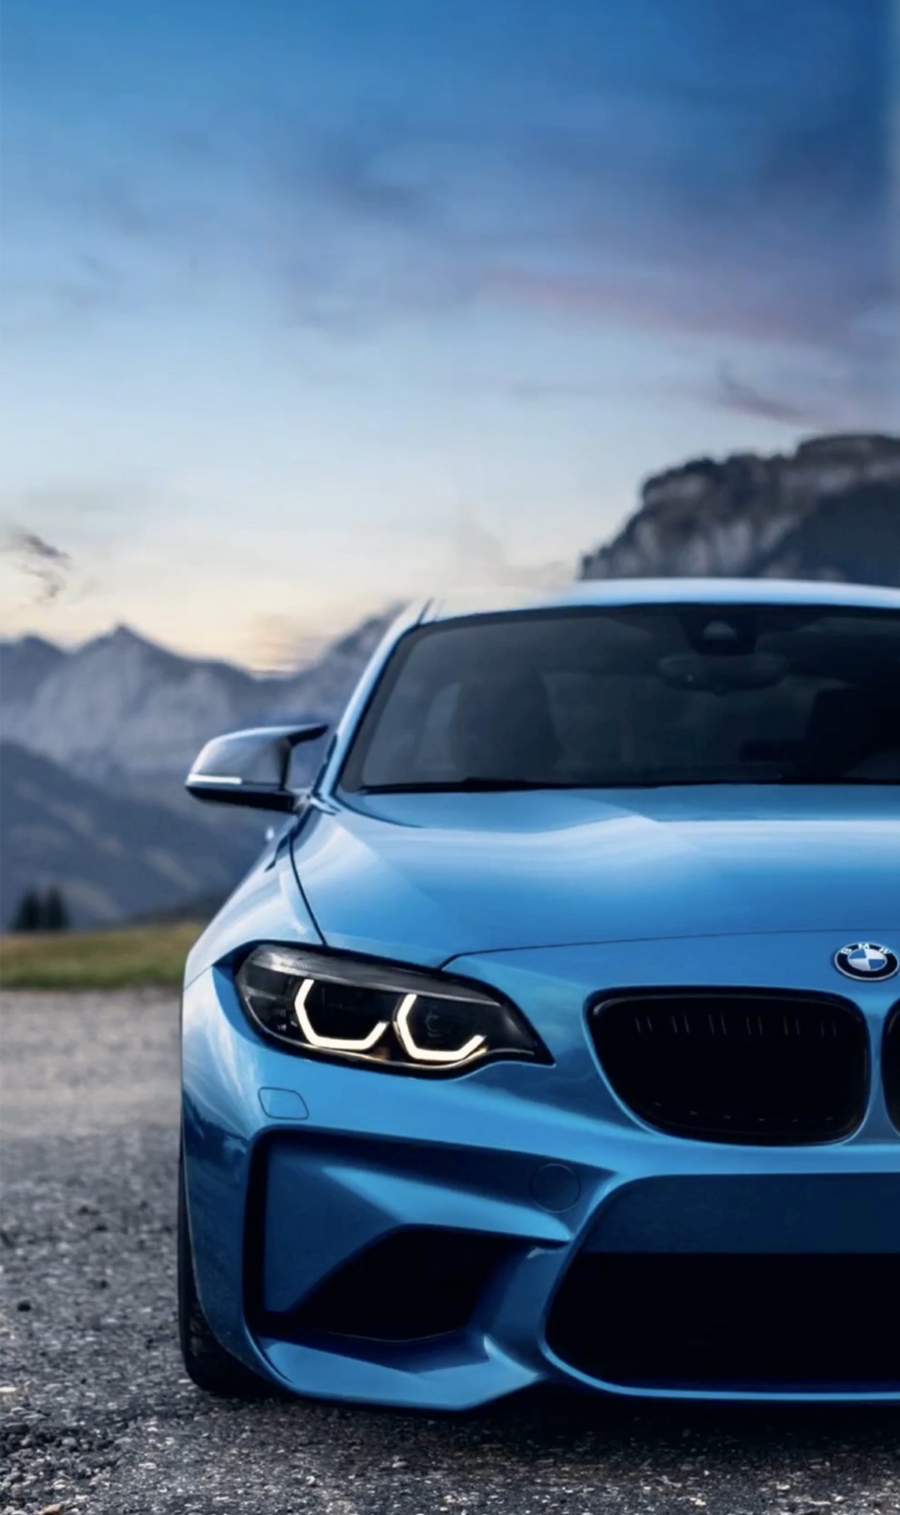 BMW HD IPhone Wallpaper - IPhone Wallpapers : iPhone Wallpapers